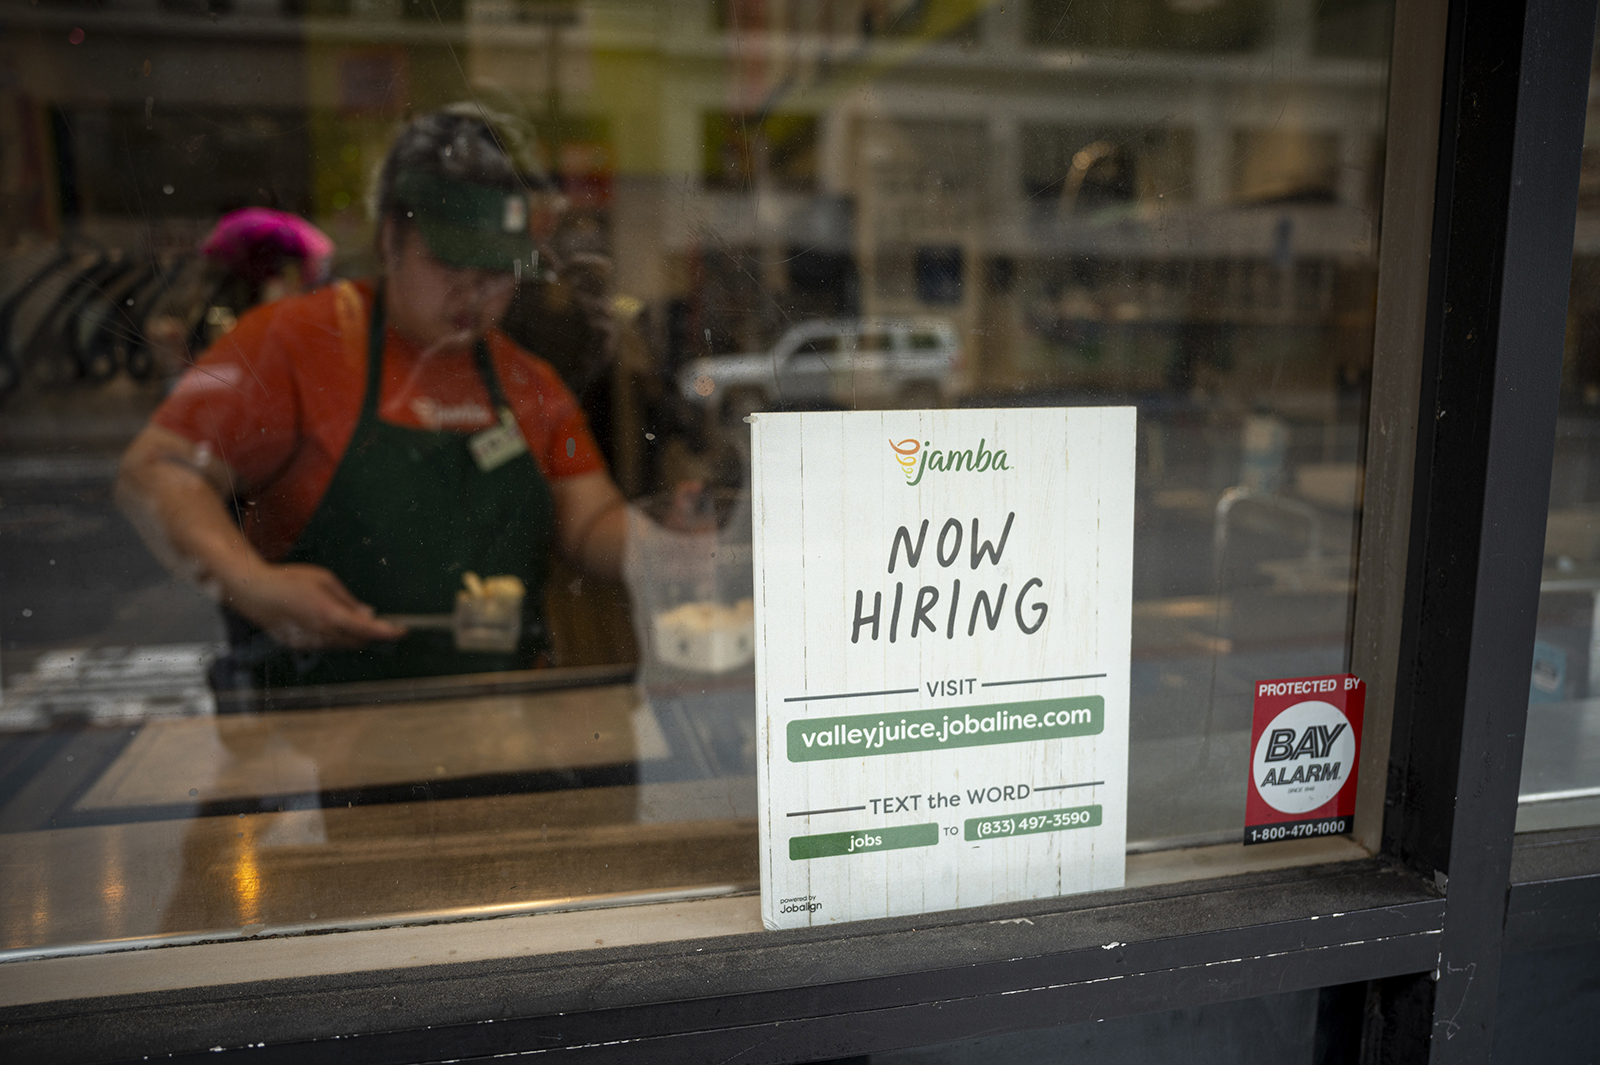 A "Now Hiring" sign at Jamba Juice in San Francisco, California, on June 26.